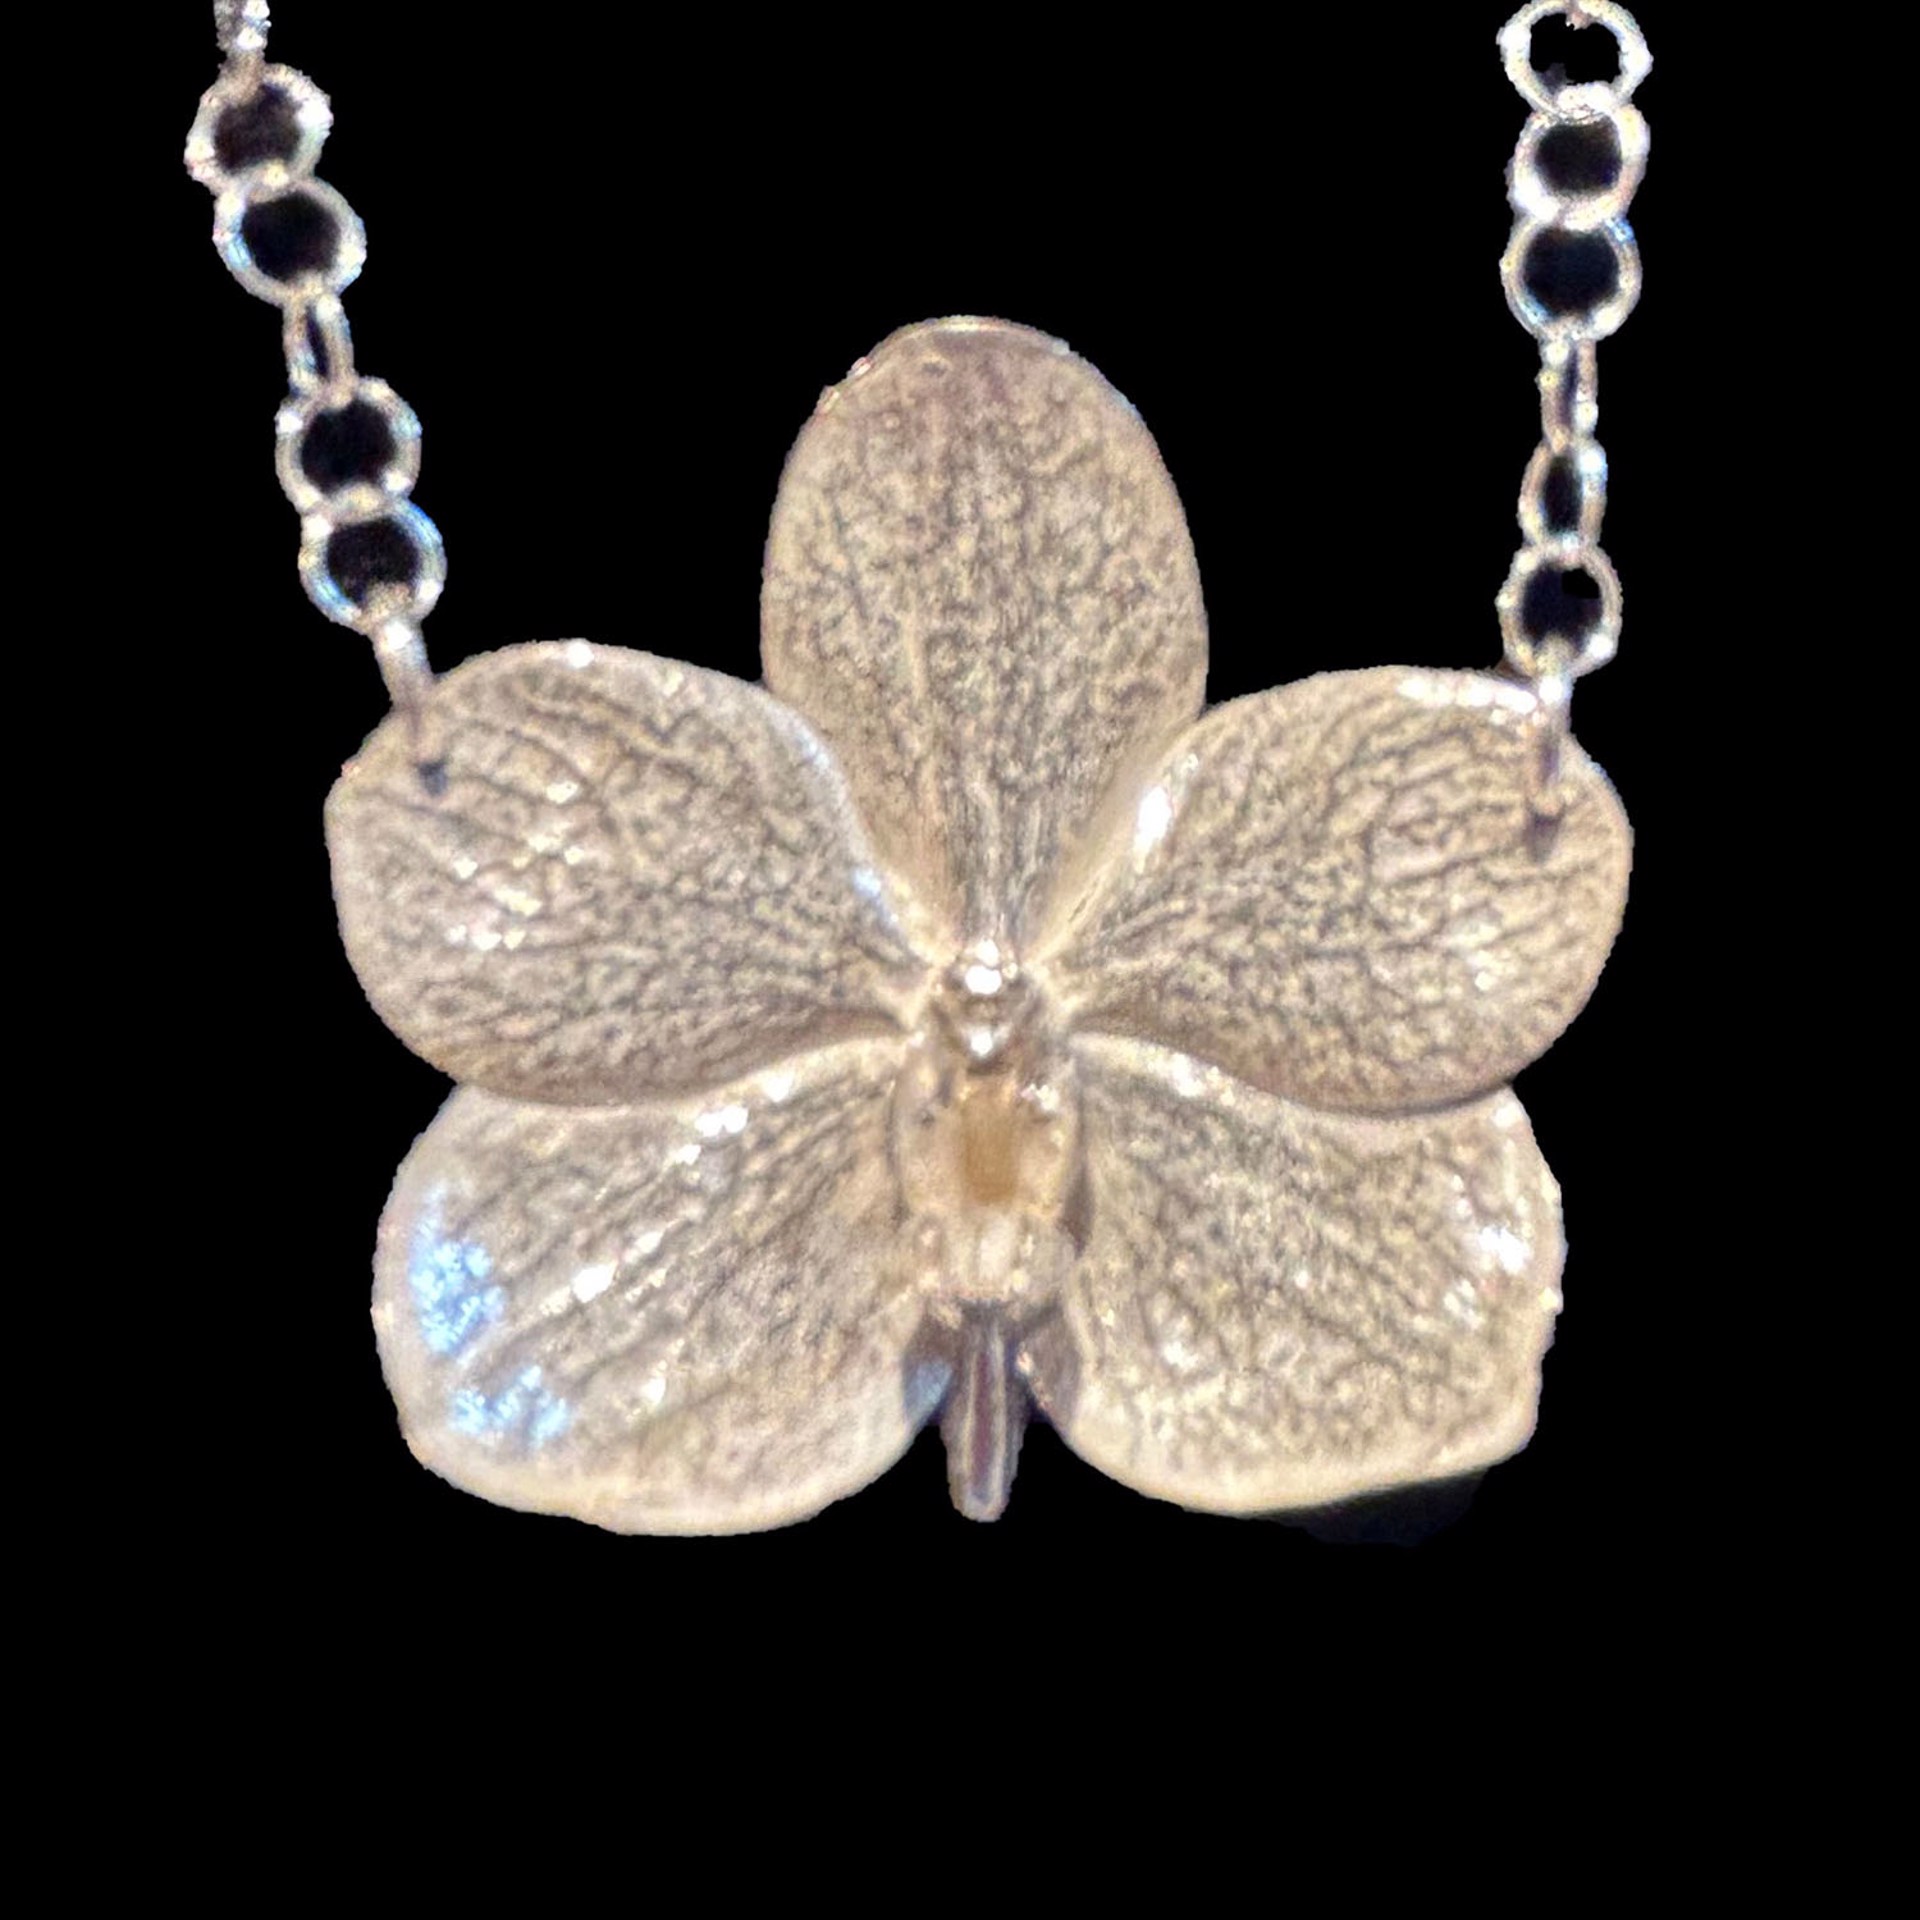 LG Single Orchid Necklace by Wayne Keeth